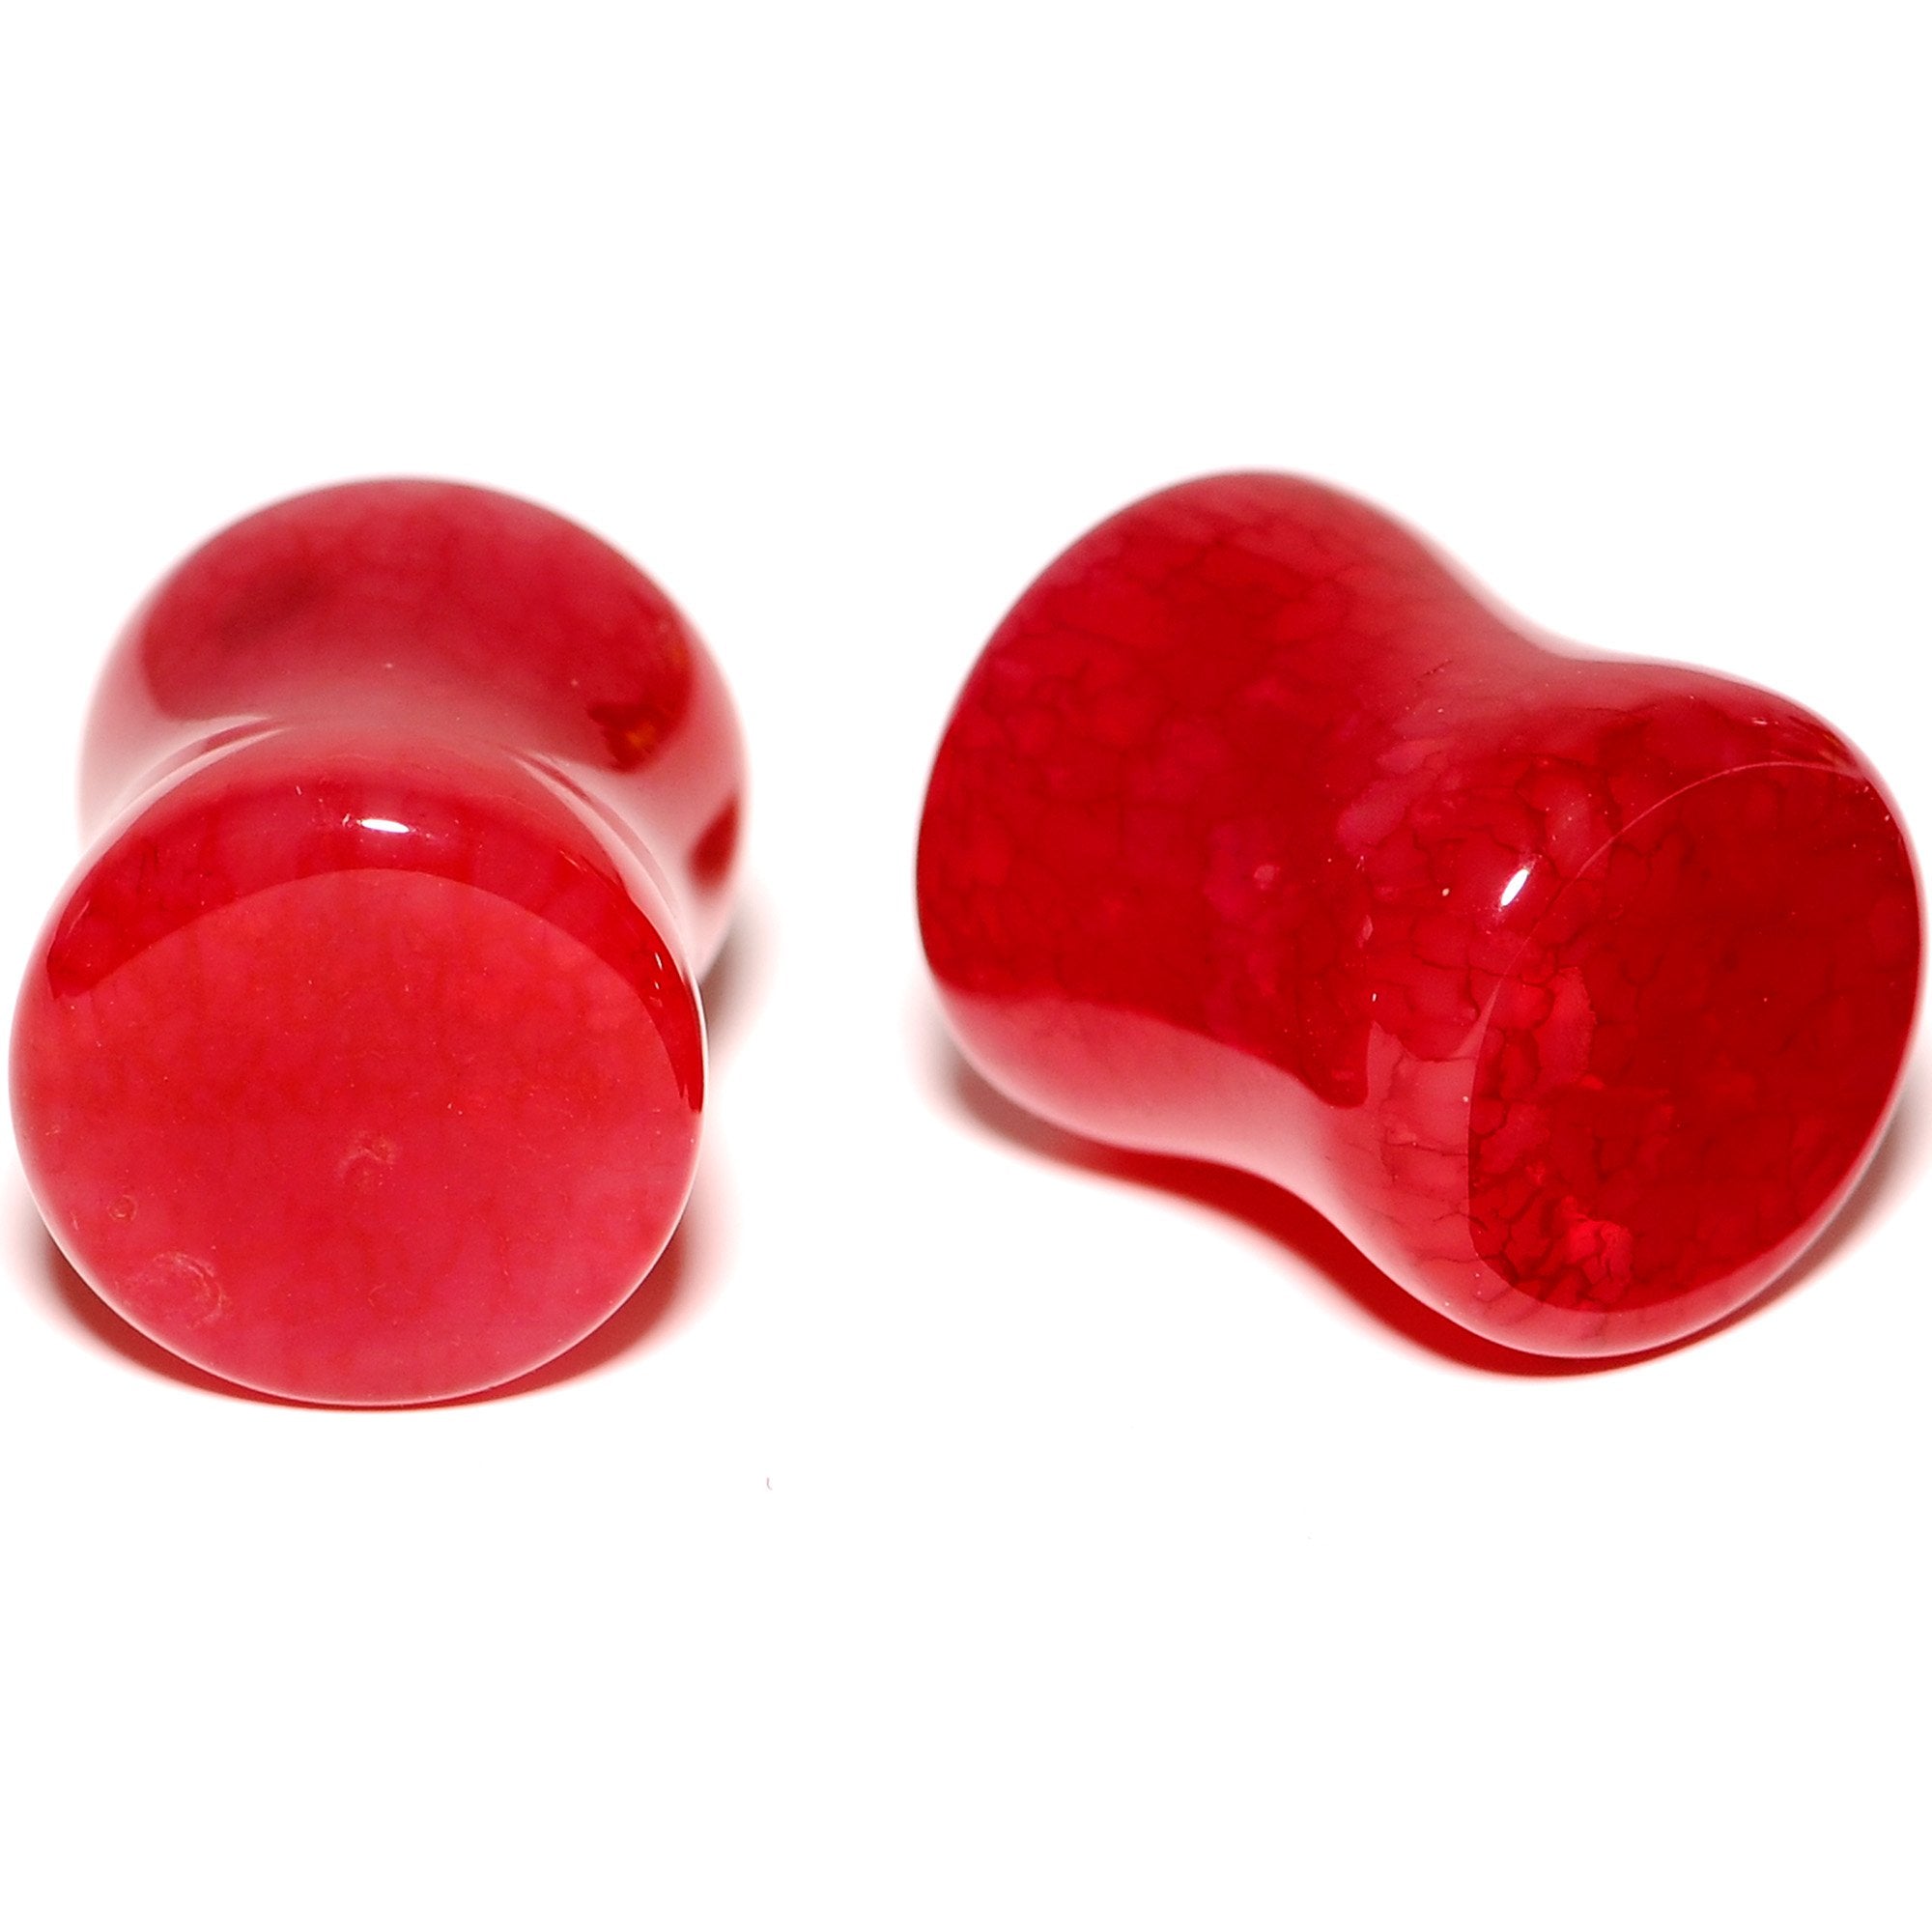 Solid Red Stone Saddle Plug Set 6mm to 25mm